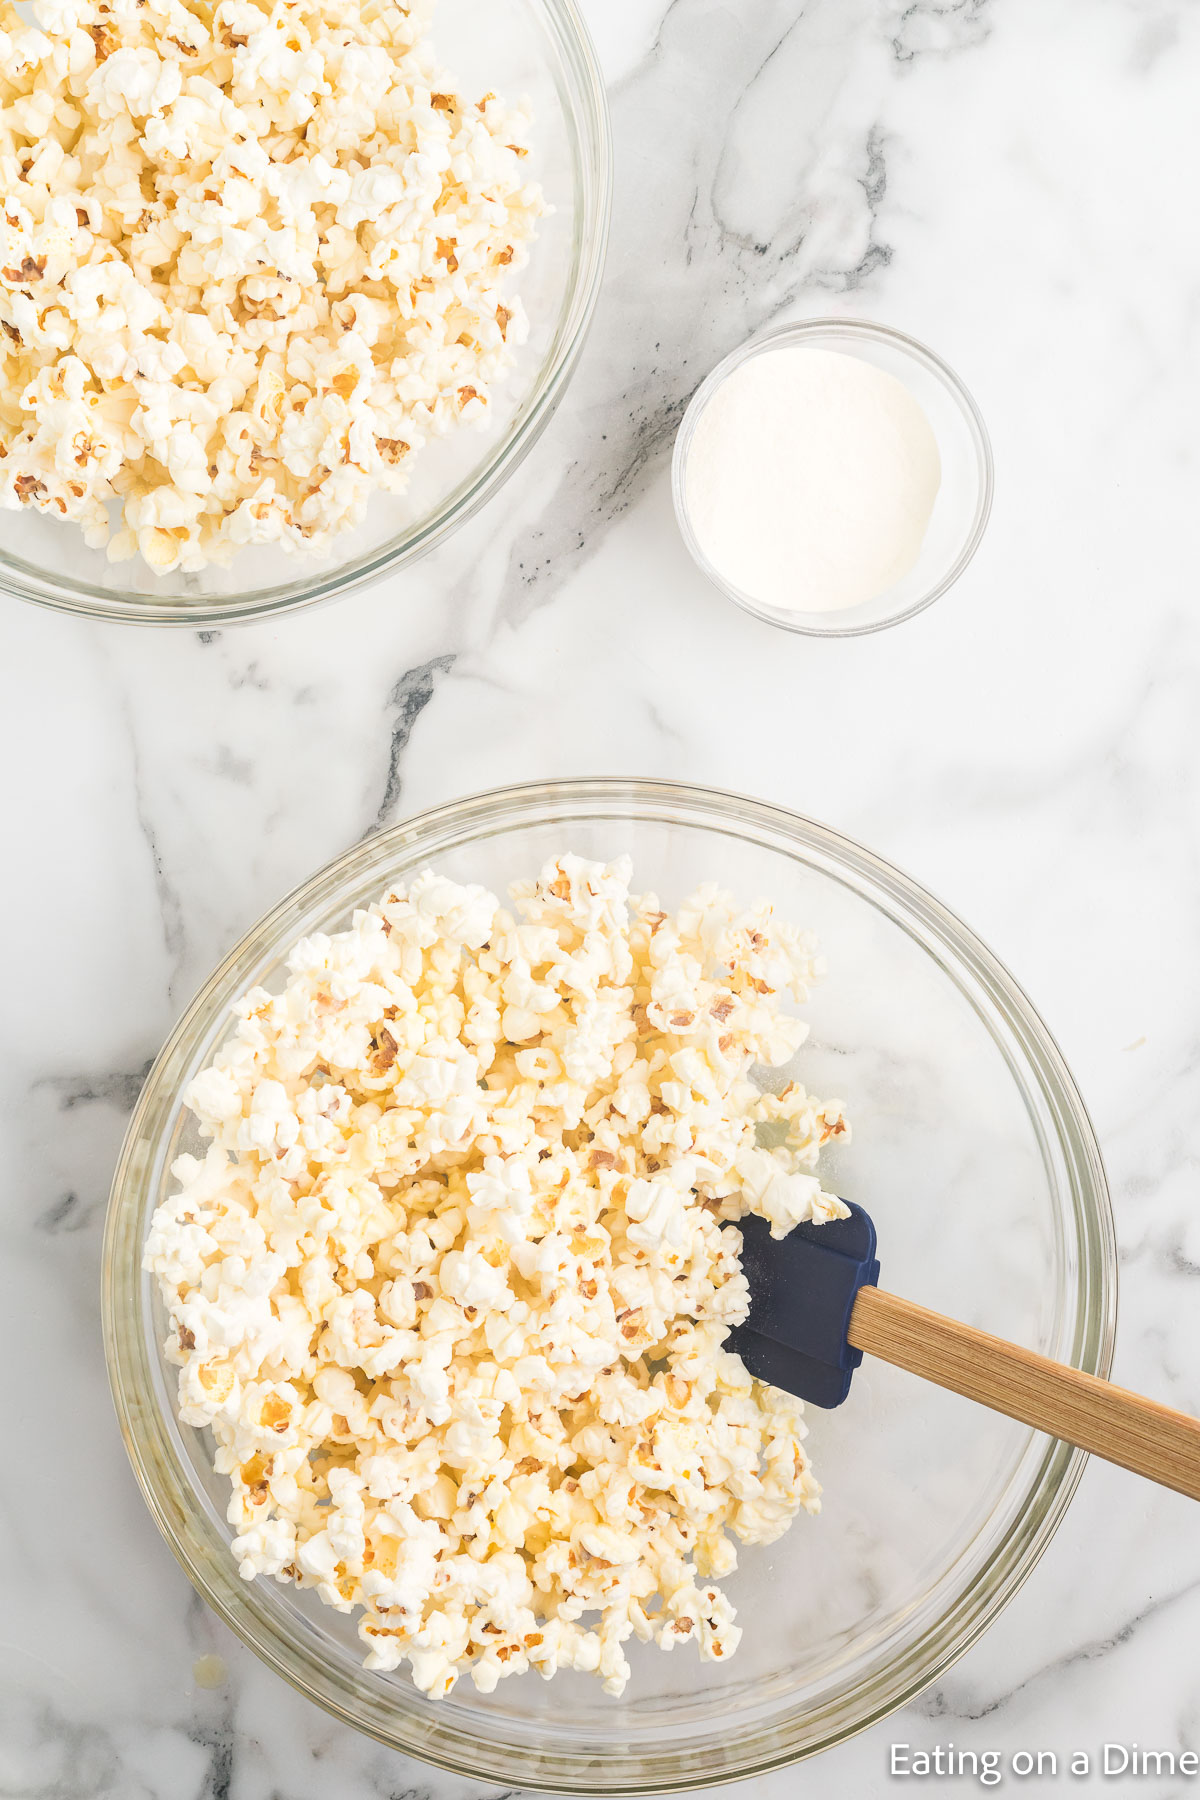 Placing popcorn in a bowl with a bowl of popcorn on the side of seasoning in a bowl